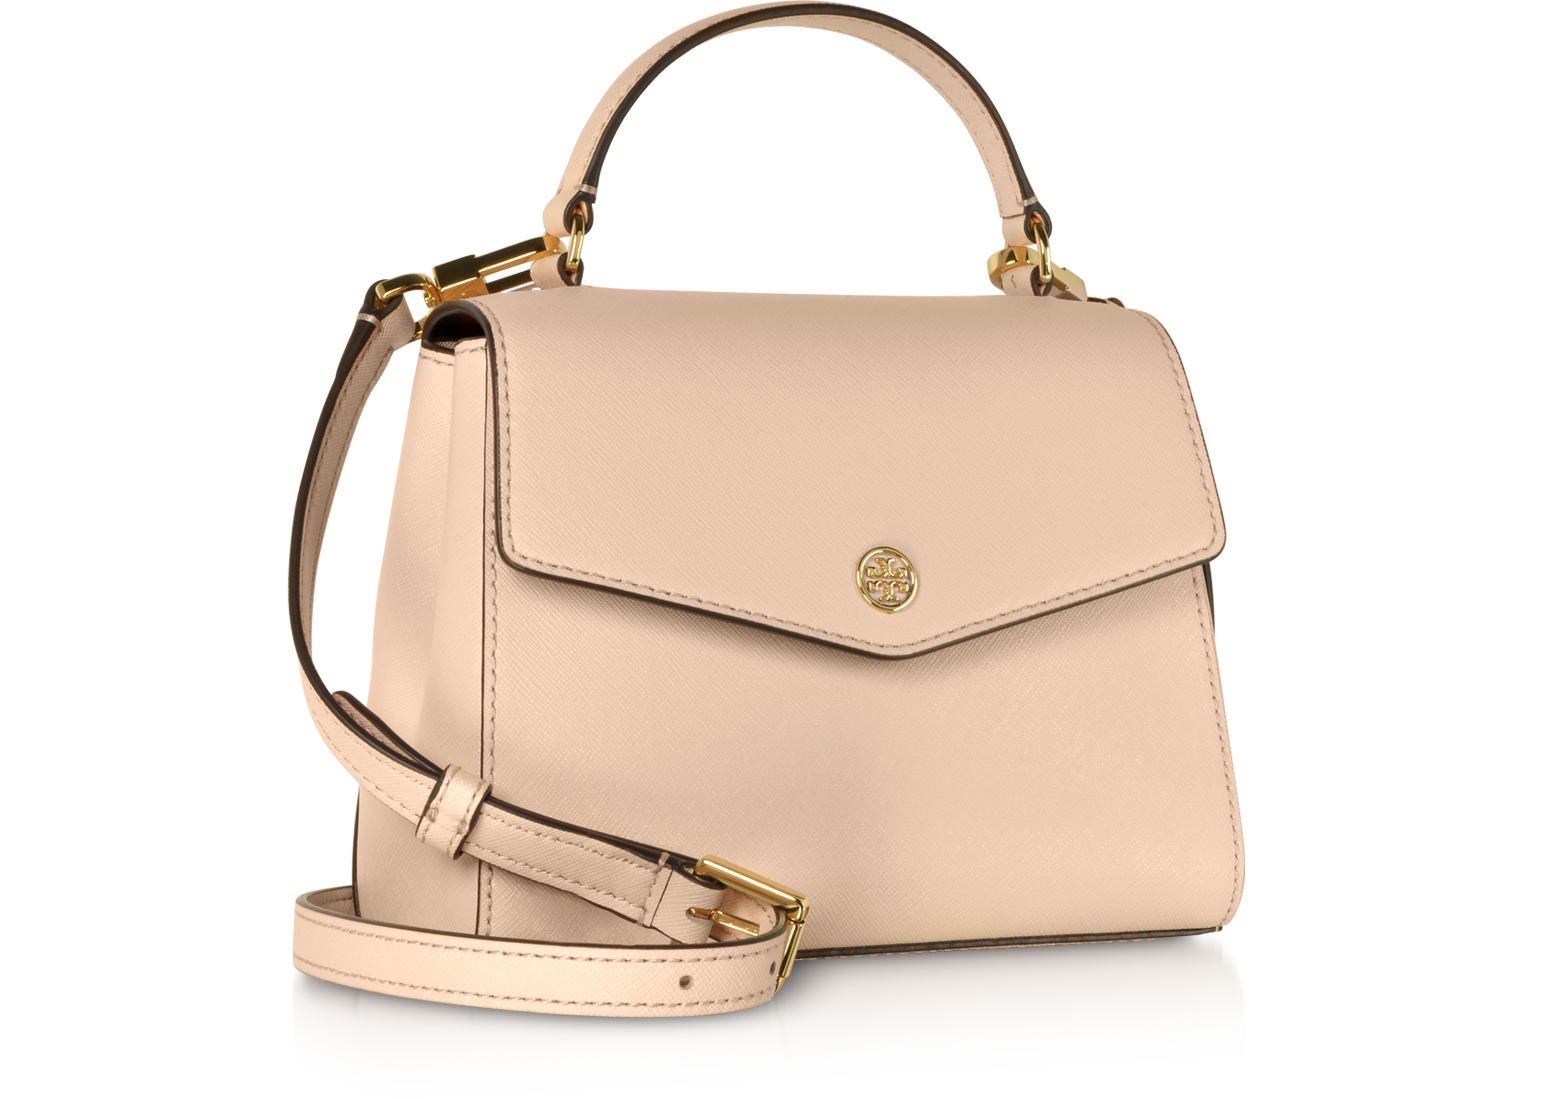 Tory Burch Pale Apricot Robinson Small Top-Handle Satchel Bag at